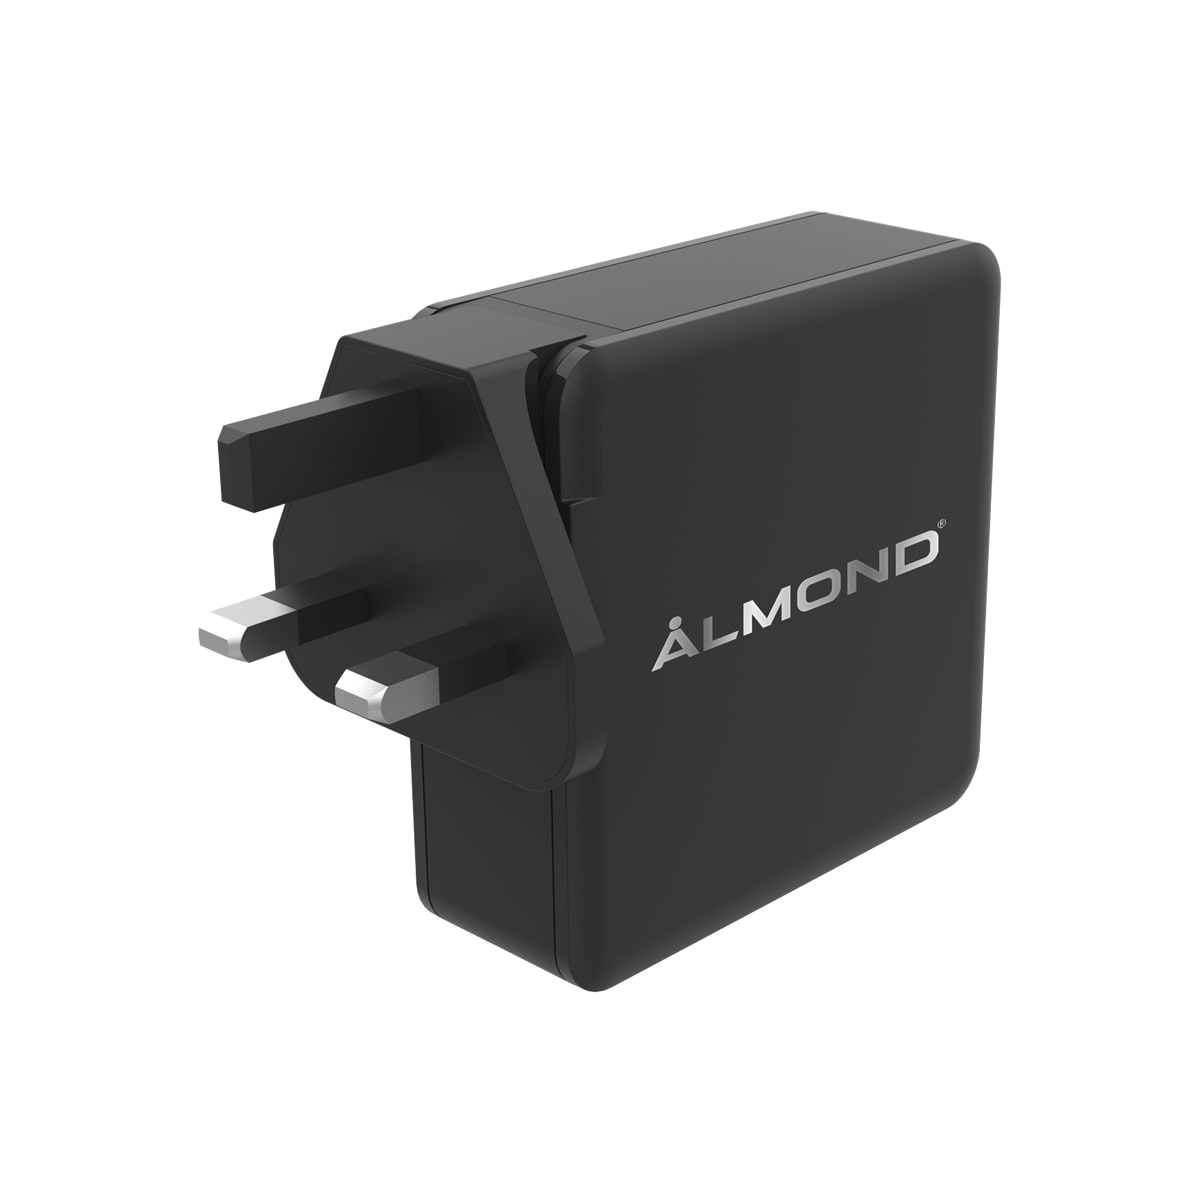 ALMOND PD100UTZ 100W Travel Charger, , large image number 2